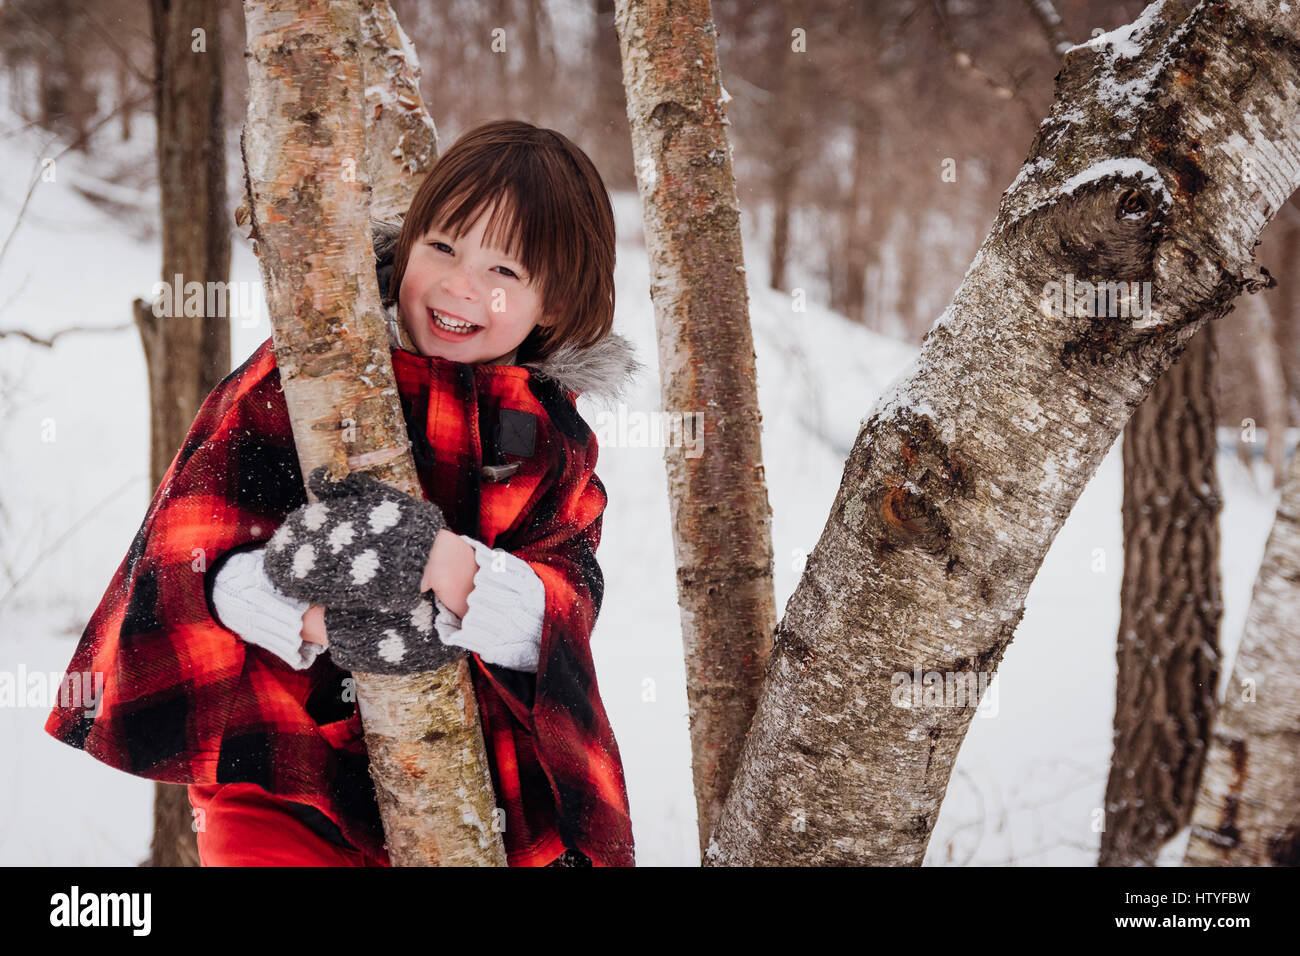 Girl in hooded parka standing amongst trees in winter Stock Photo